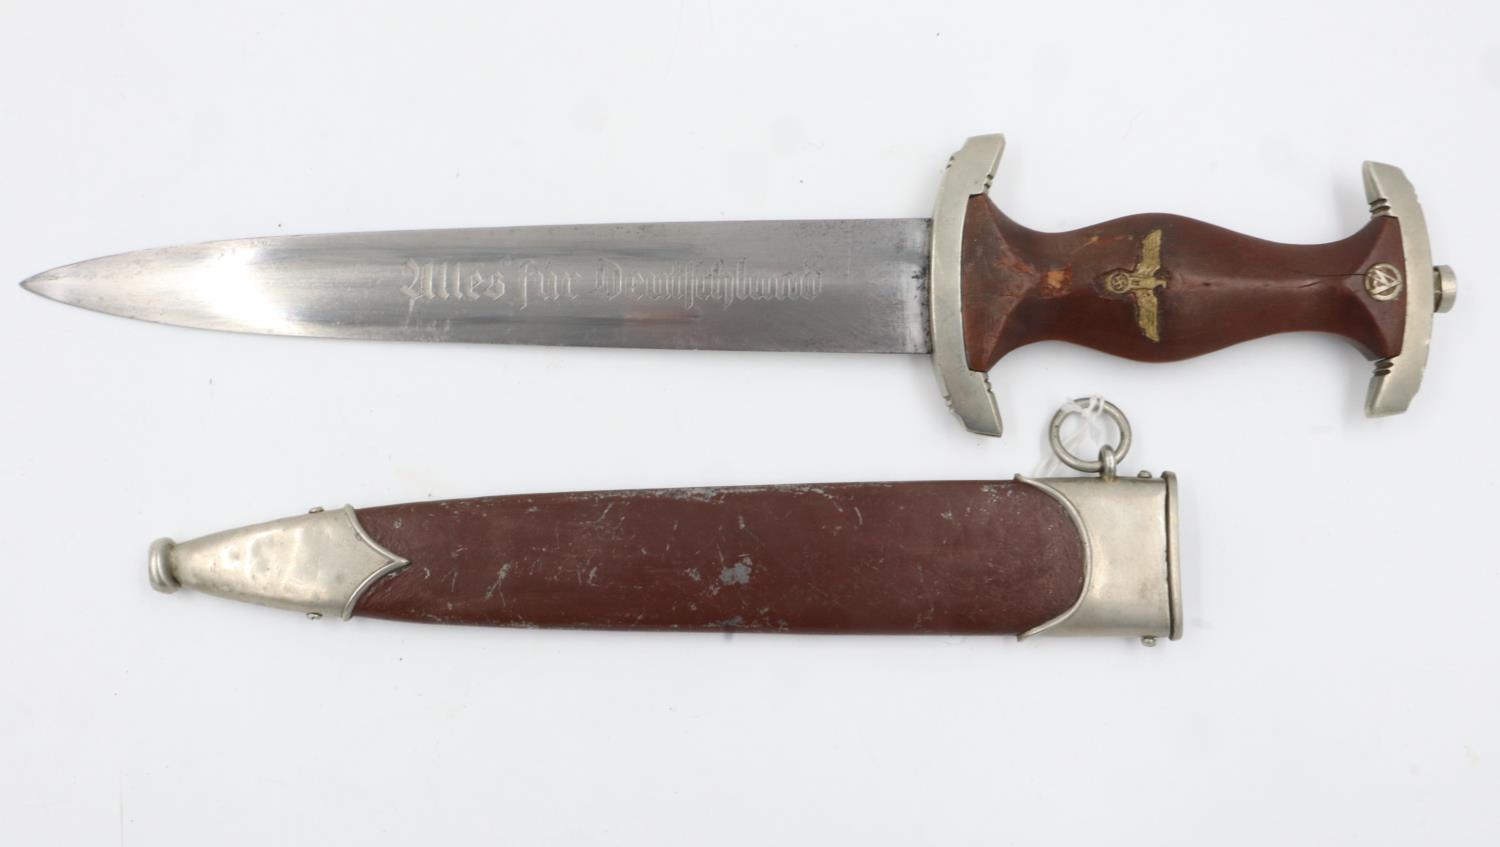 Third Reich SA Dagger with rare 1935 makers mark C. Eppenstien-Sohn. Gruppe Marked Wm for